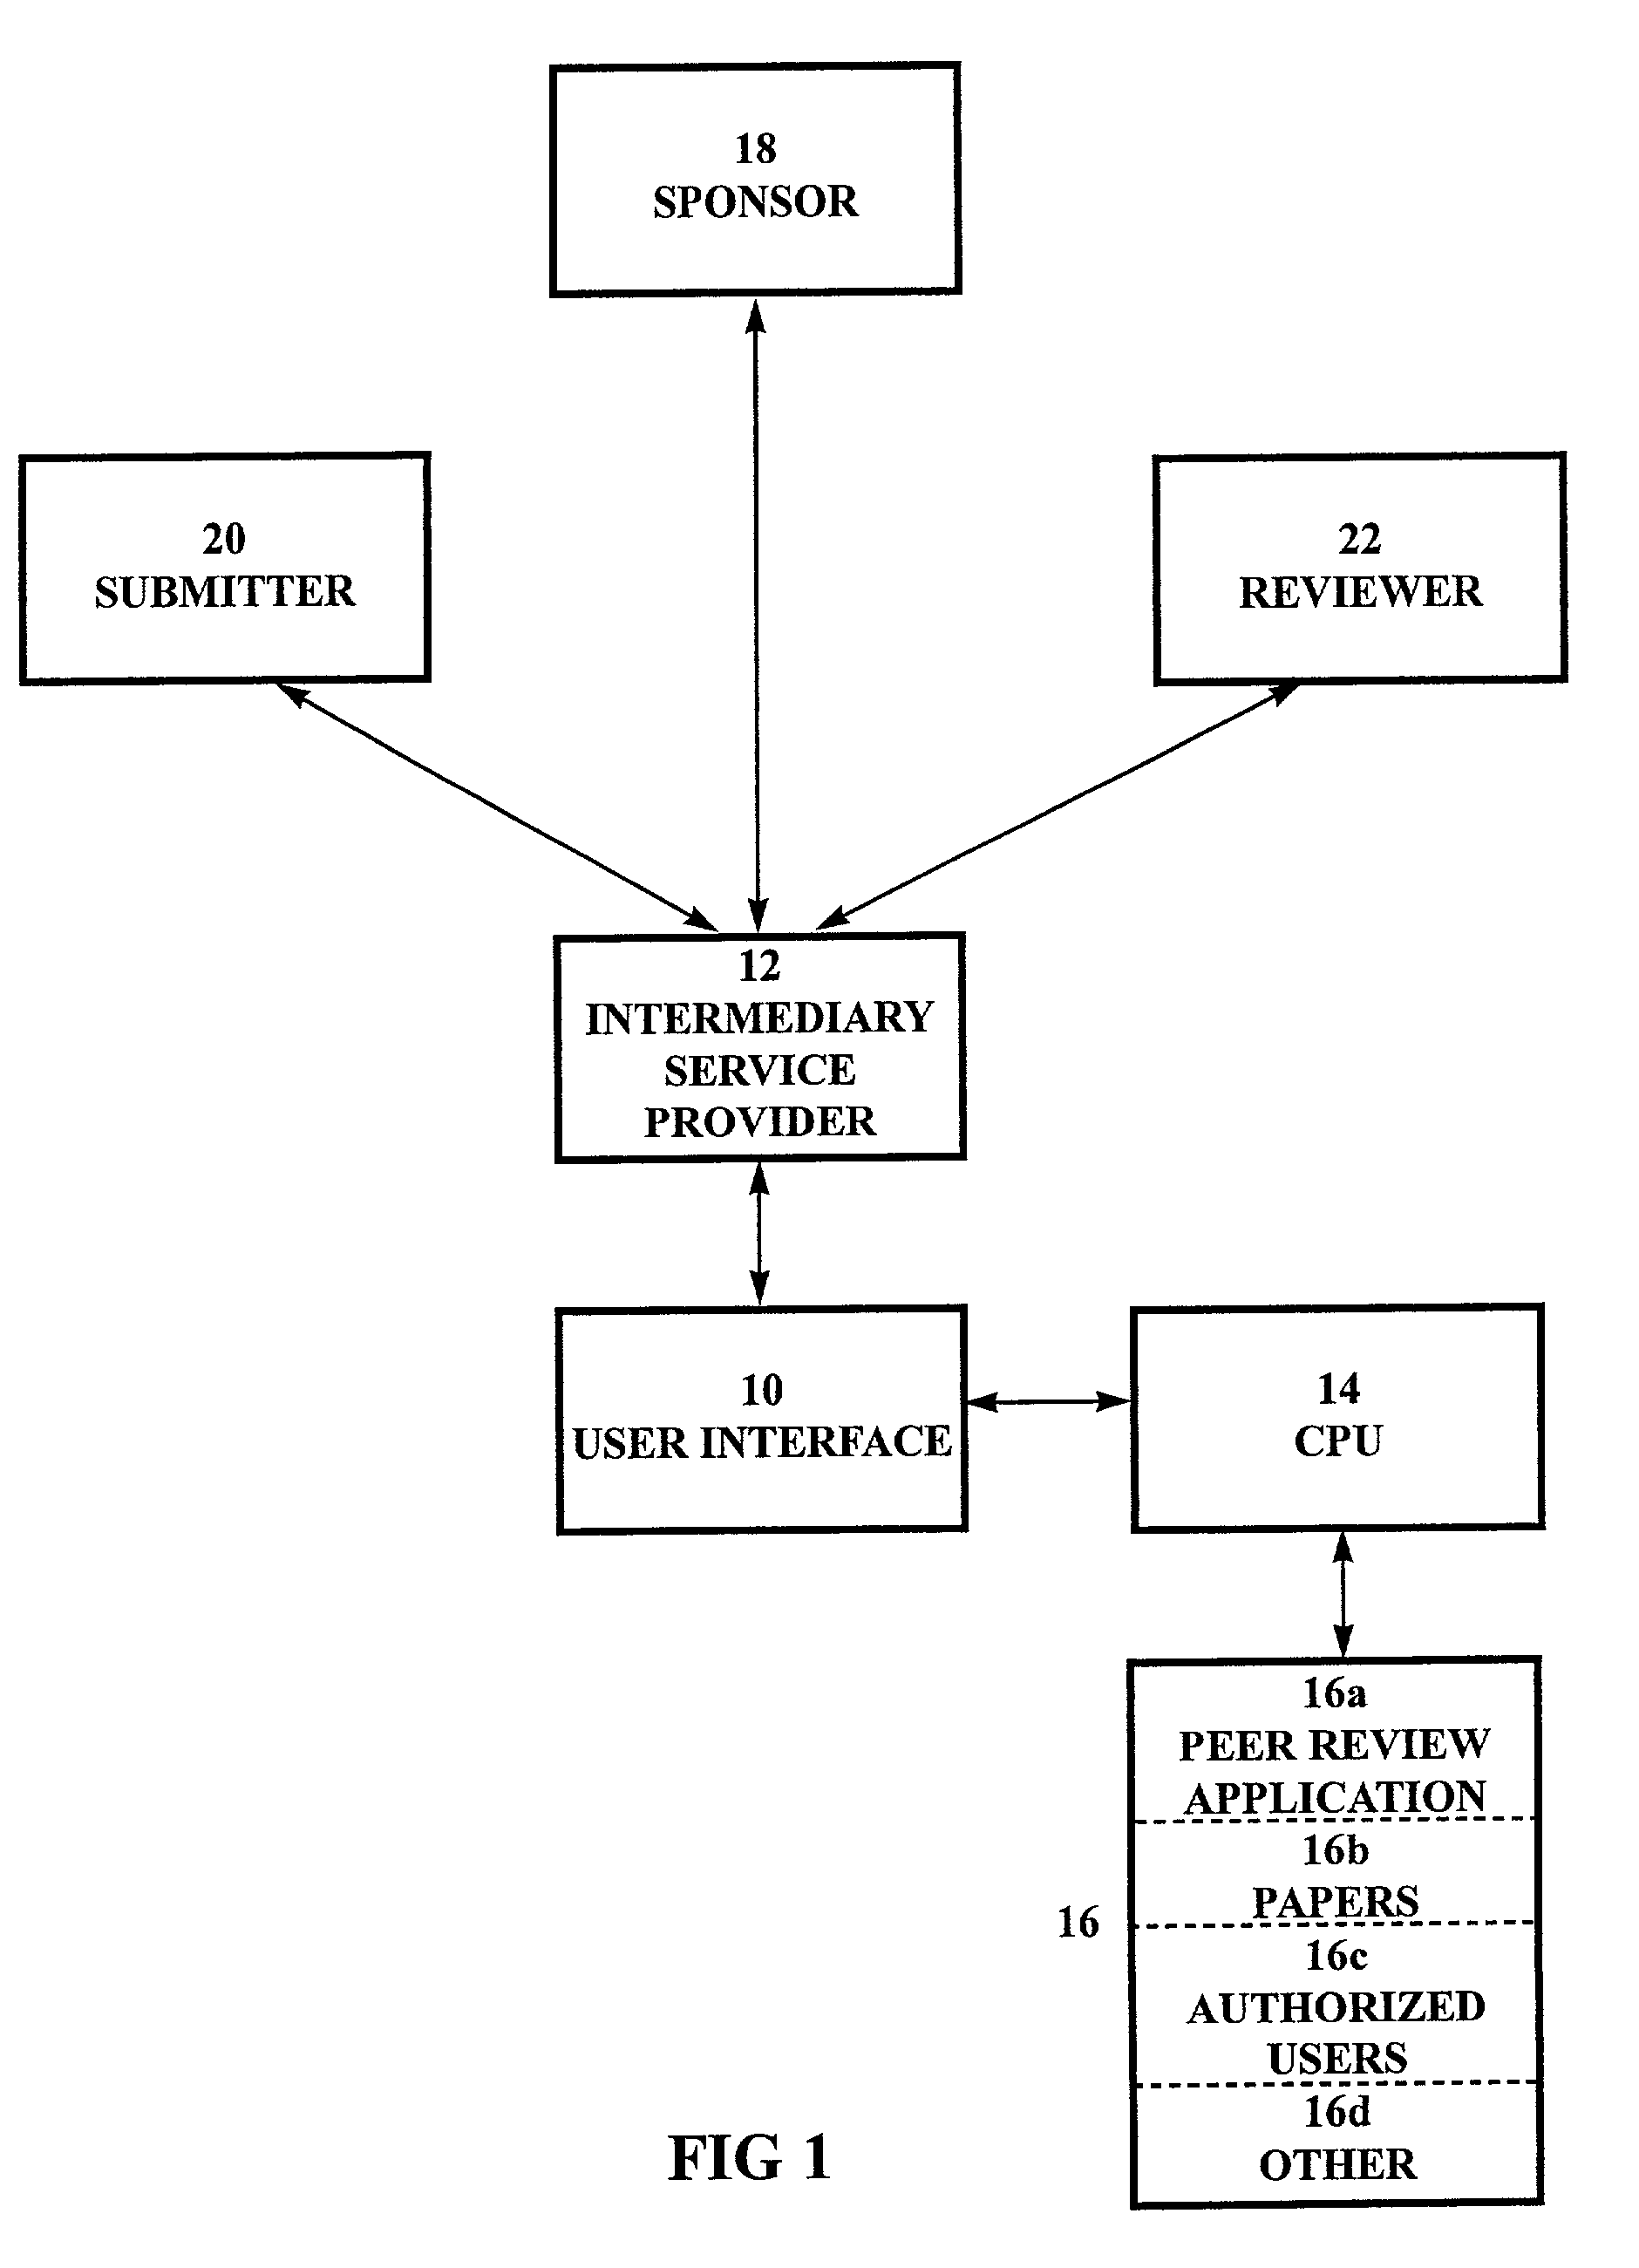 Systems and methods for conducting a peer review process and evaluating the originality of documents